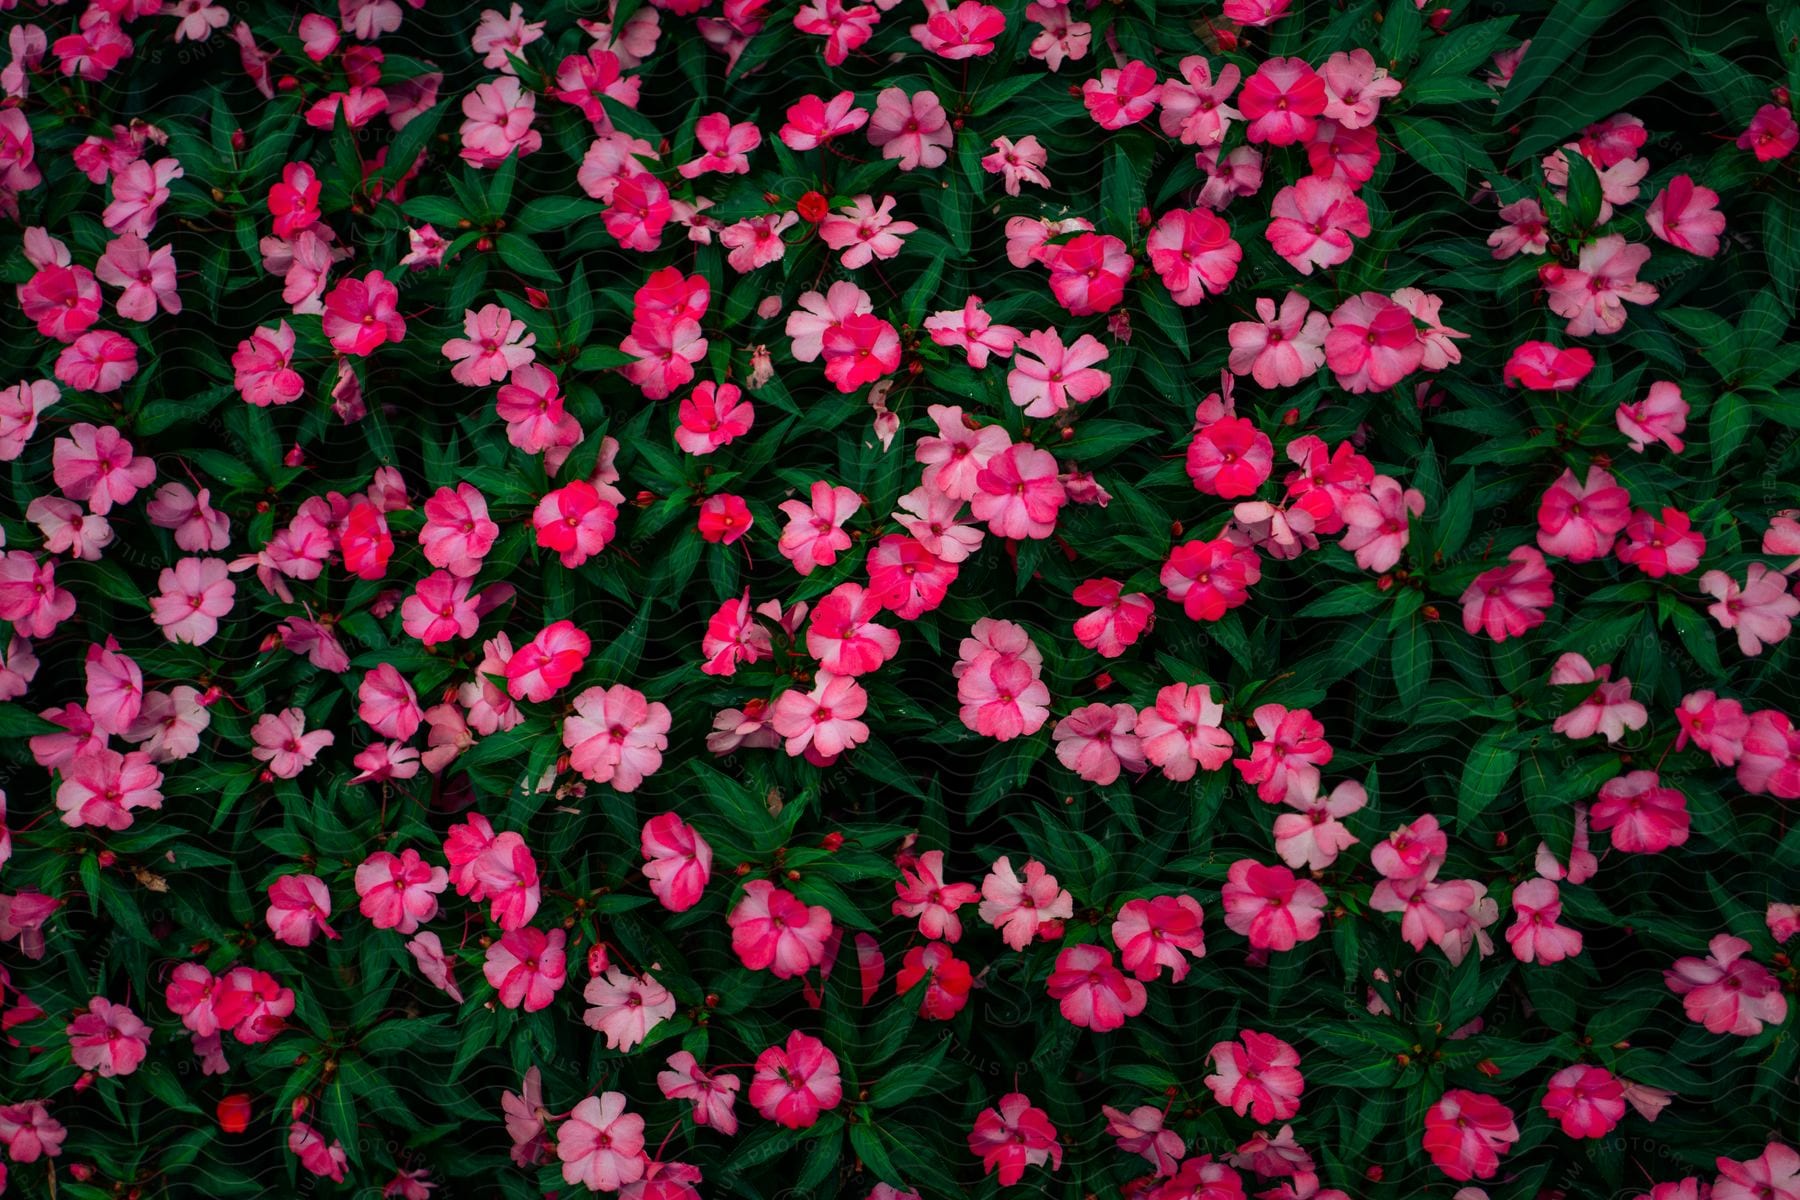 Close up of pink flowers blooming in the spring season